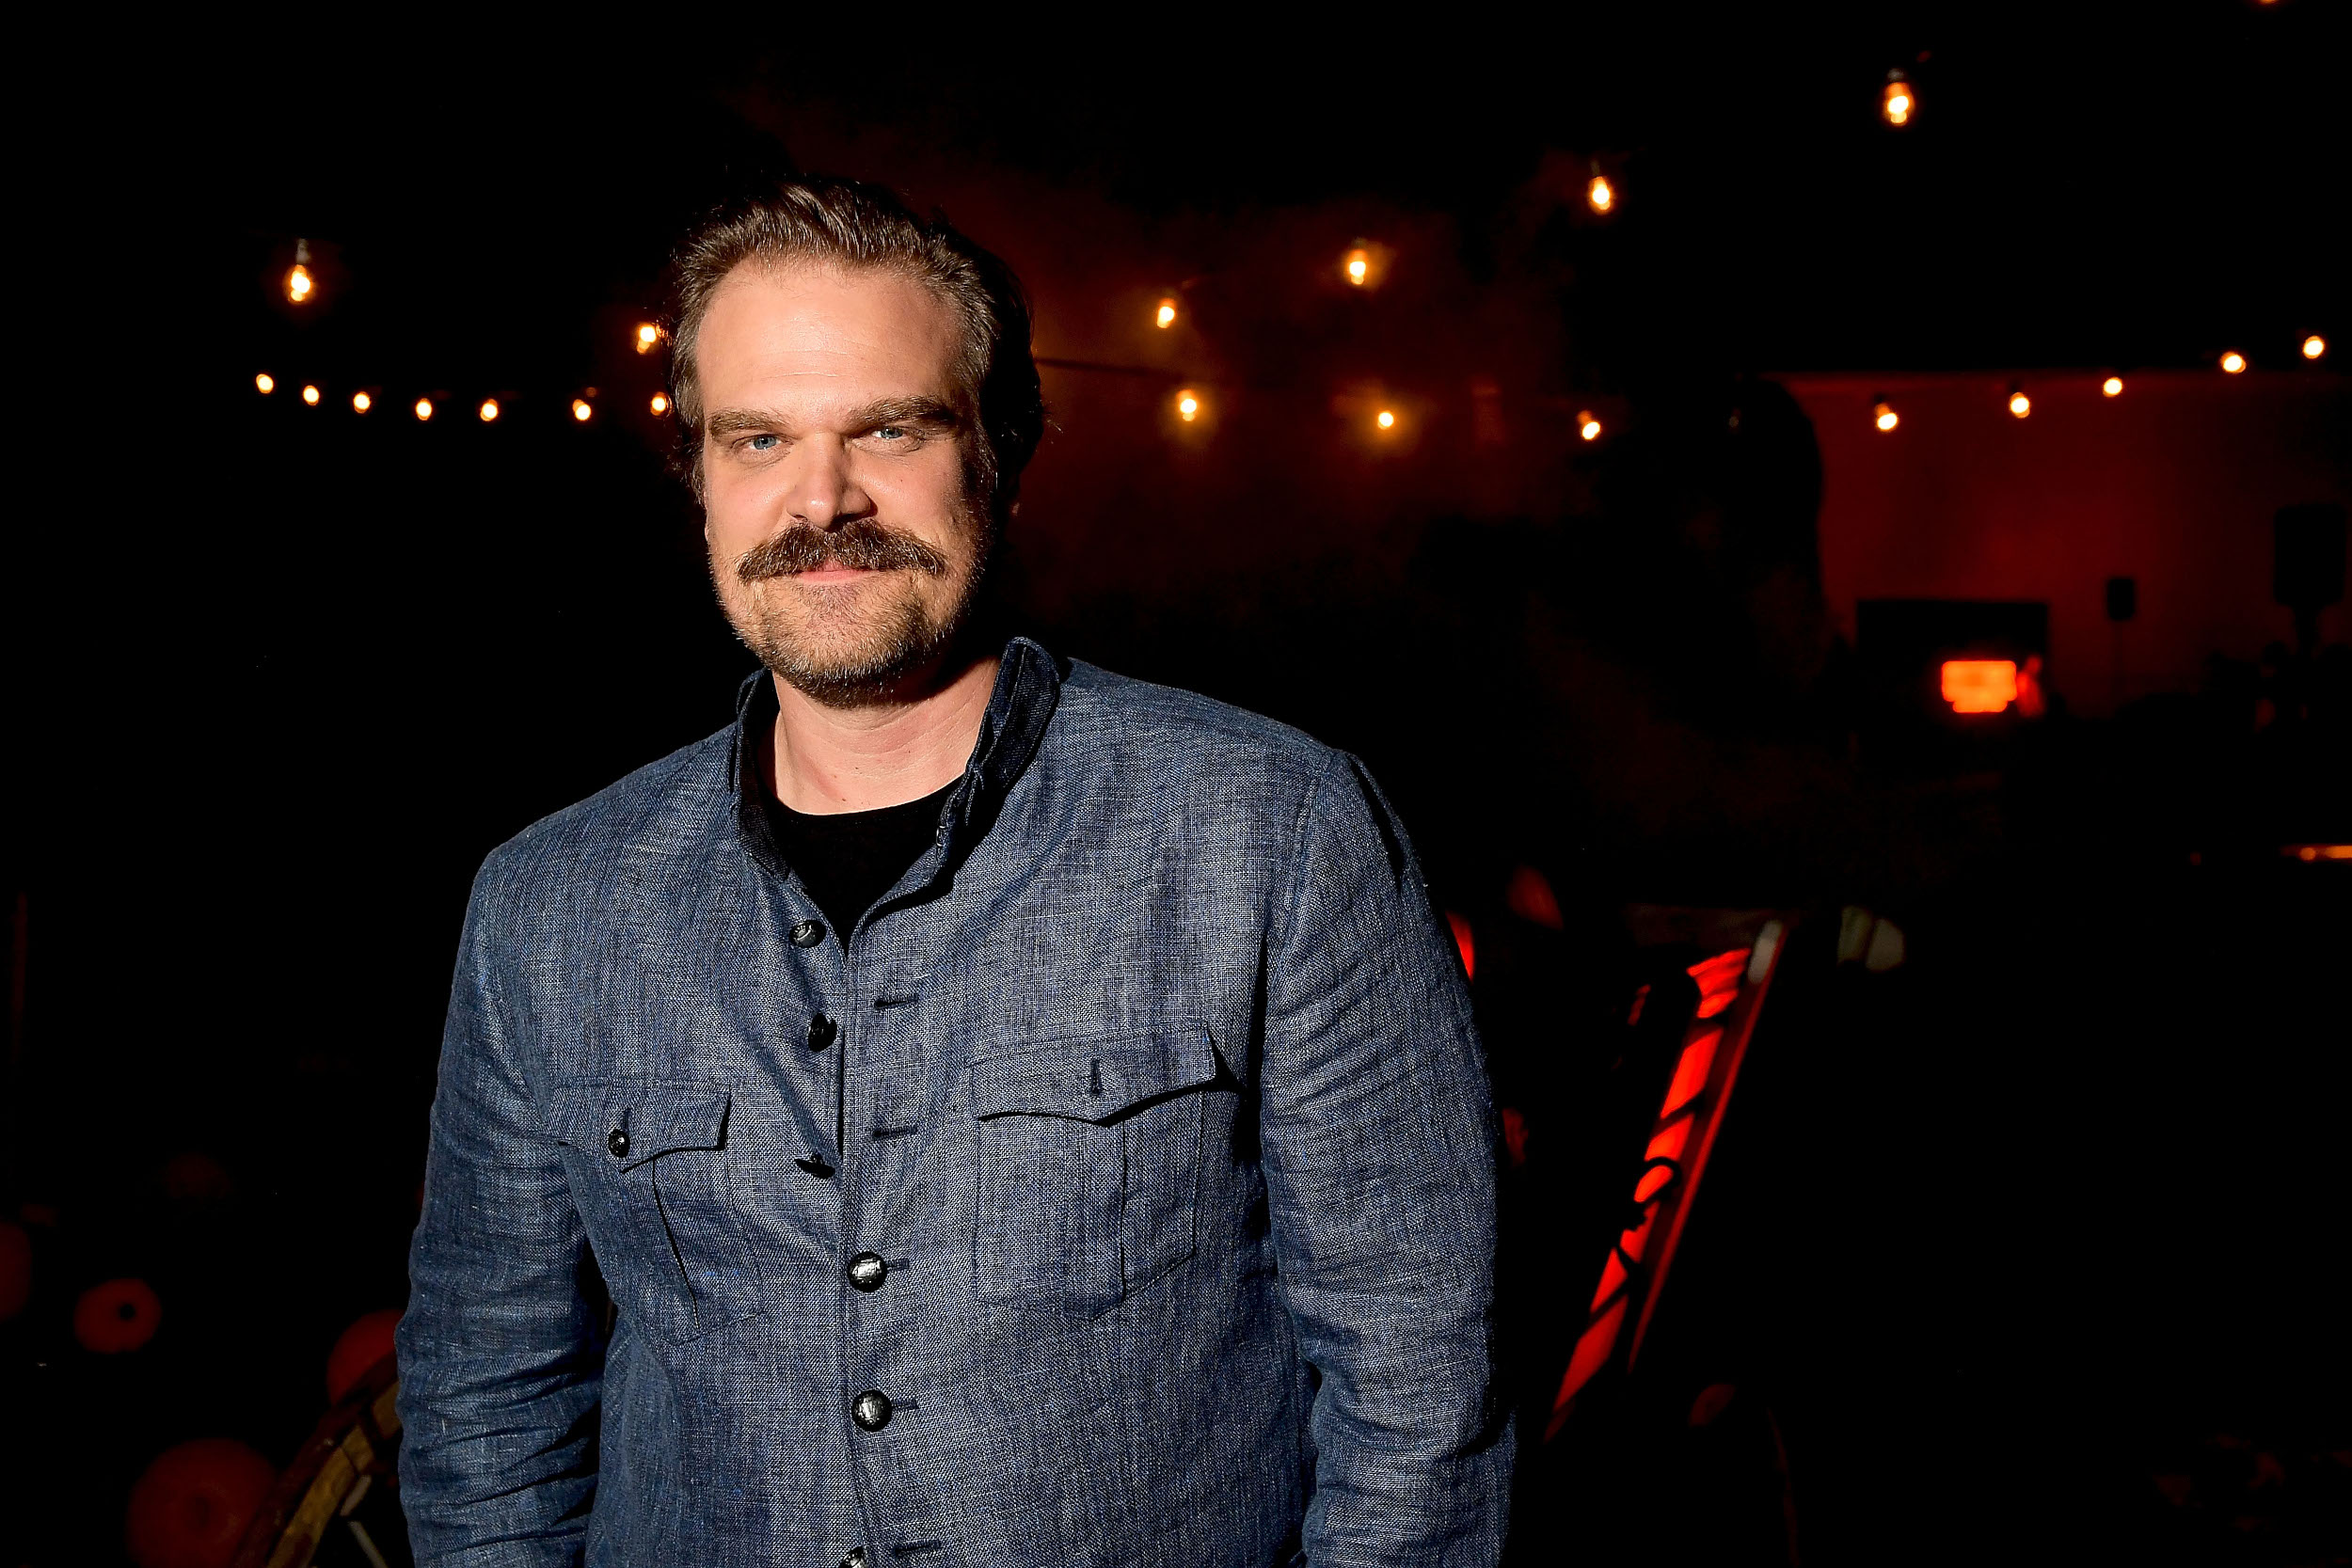 'Black Widow' star David Harbour wears a blue shirt and smiles